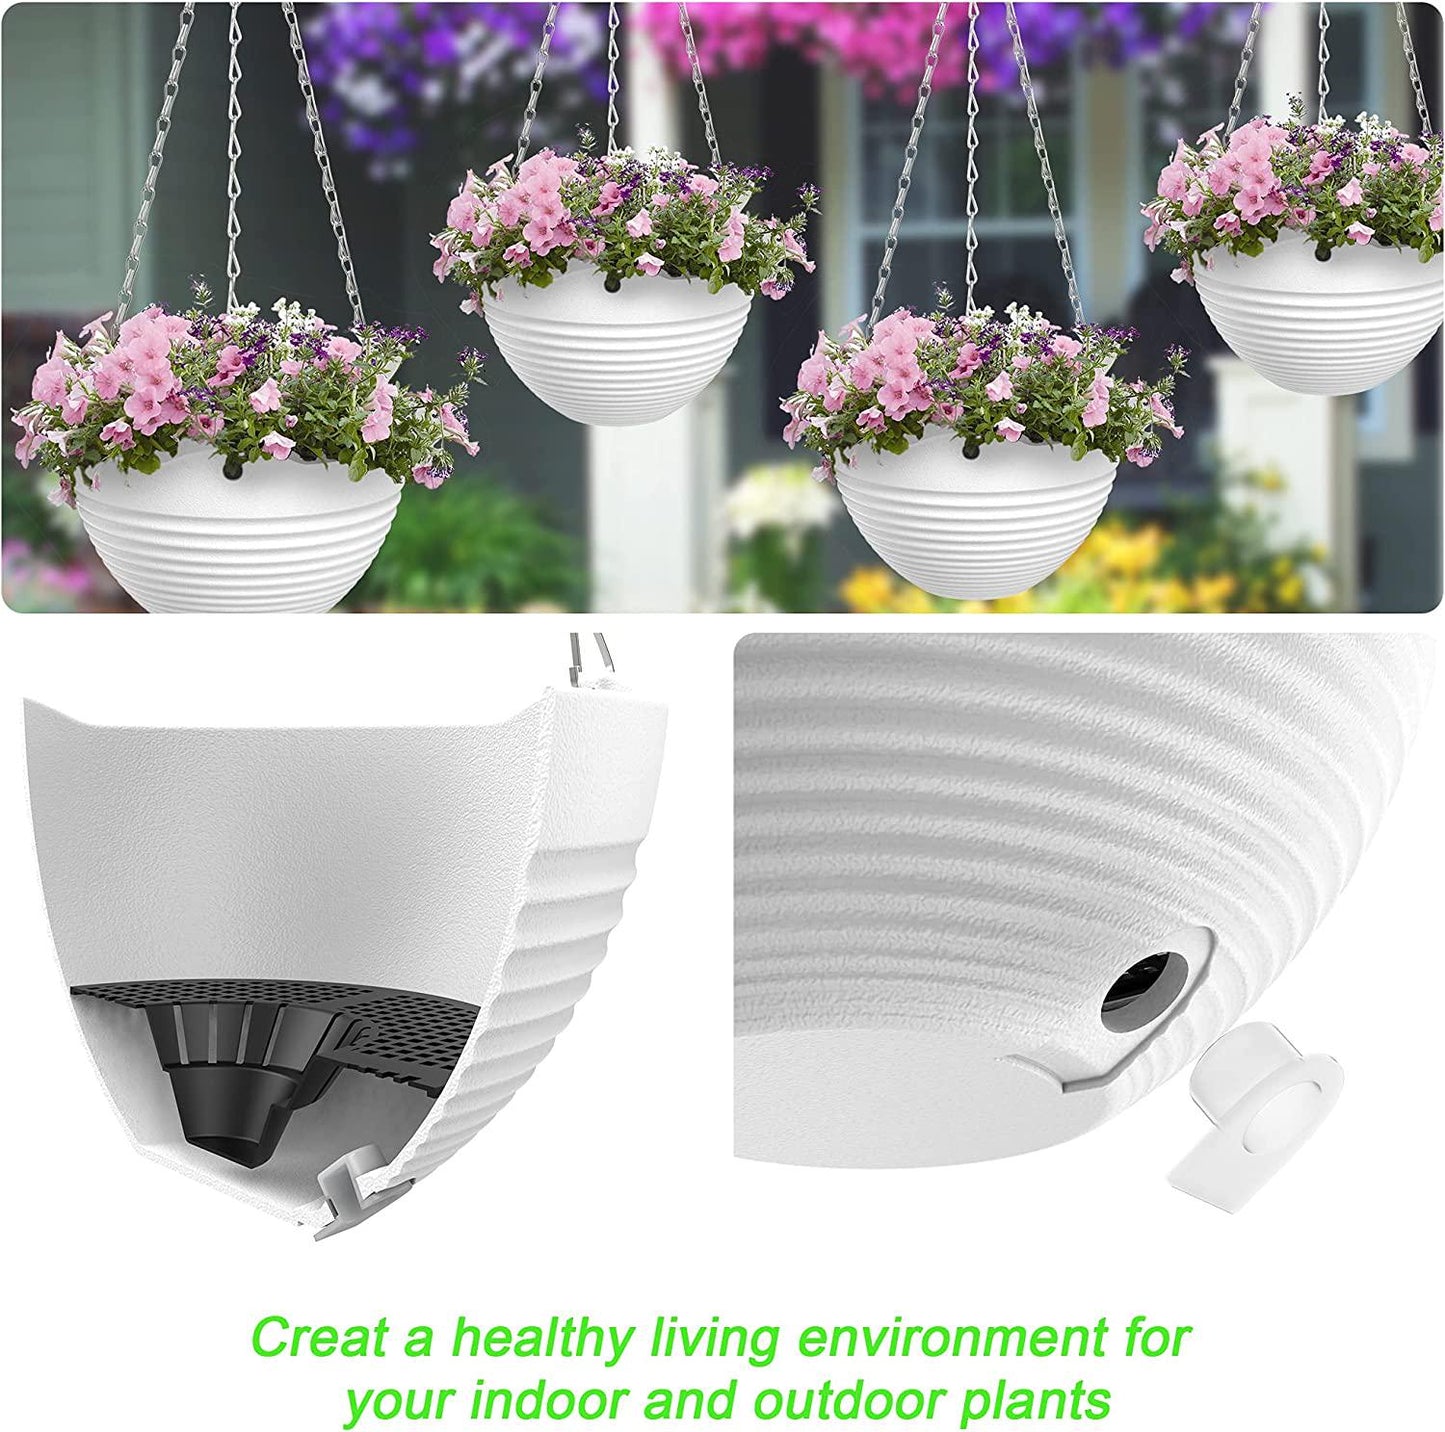 Hanging Planters, Set of 9 White Hanging Pots, 8 Hanging Flower Pots, Hanging Plant Pots Baskets with Drainage Plugs, Water Barrier and Hanging Chains Free Mini Garden Tools Set, Best Garden Gift